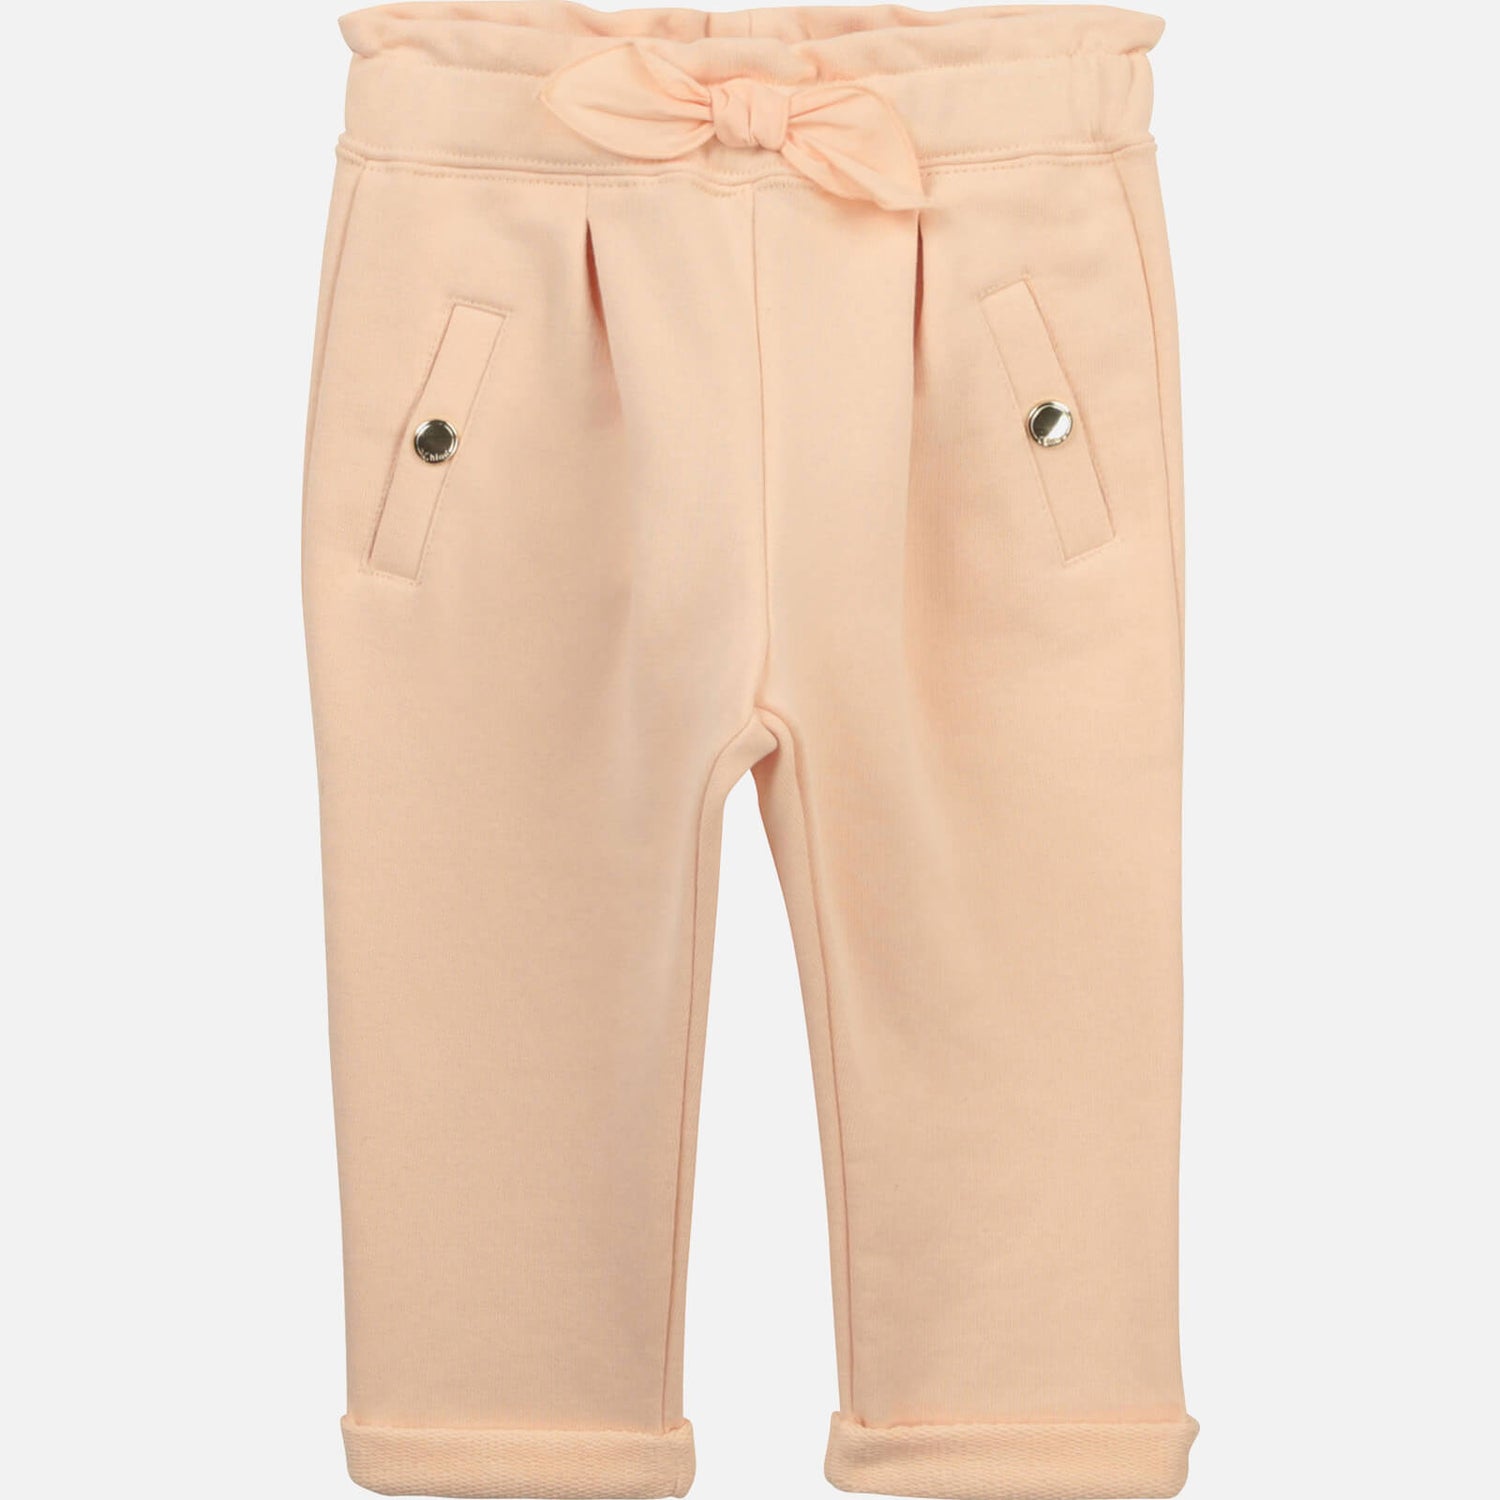 Chloe Girls' Toddlers Trousers - Pale Pink